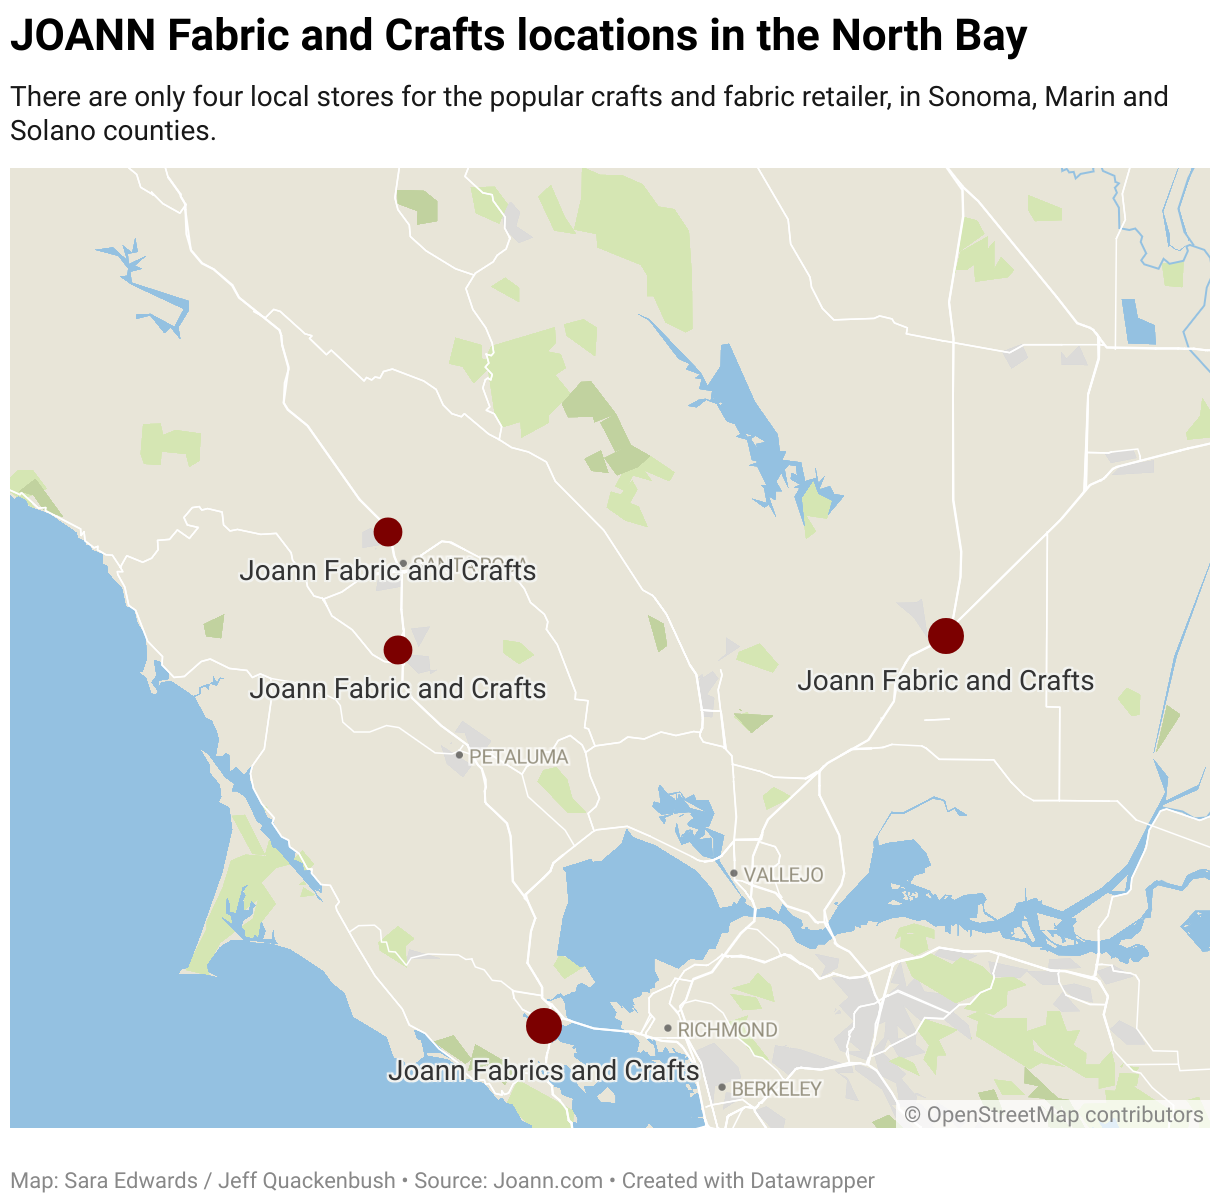 Joann fabrics and crafts retail chain files for Chapter 11